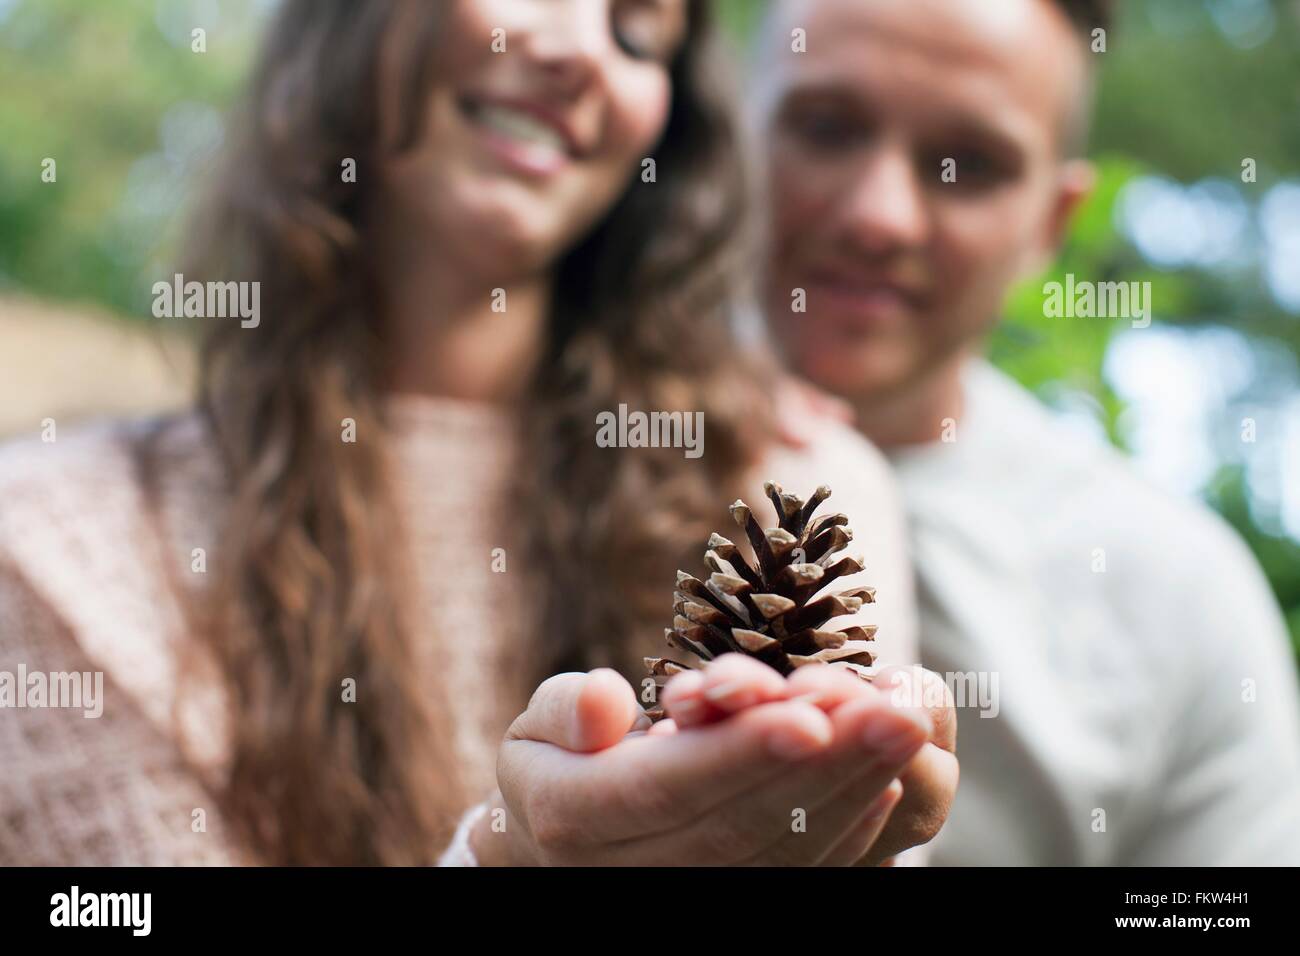 Shallow focus of couple with woman holding pine cone on hand Stock Photo